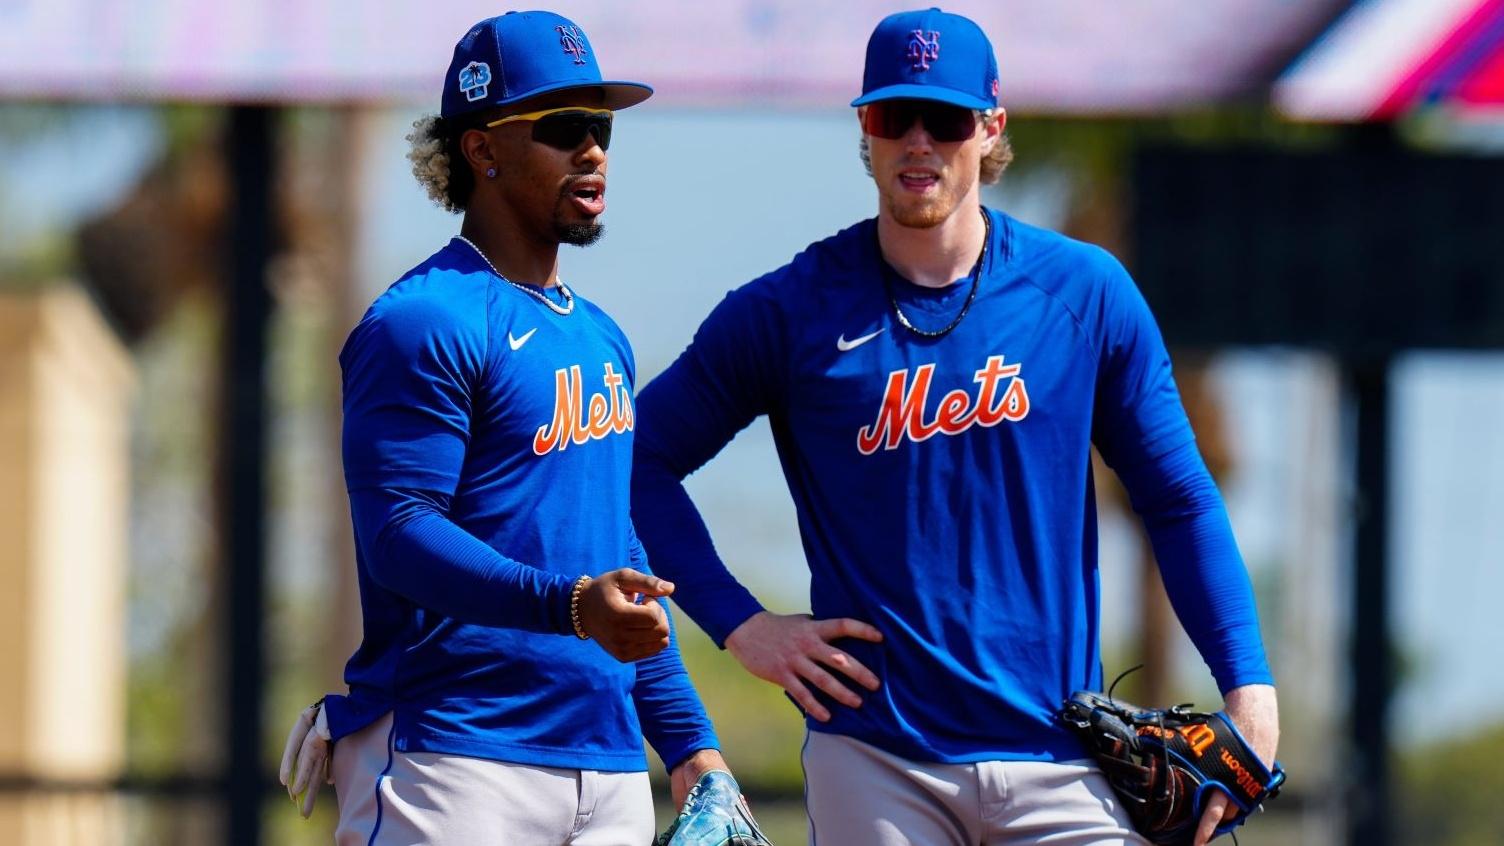 Feb 27, 2023; Jupiter, Florida, USA; New York Mets shortstop Francisco Lindor (12) and third baseman Brett Baty (22) warm up prior to a game against the St. Louis Cardinals at Roger Dean Stadium. / Rich Storry-USA TODAY Sports